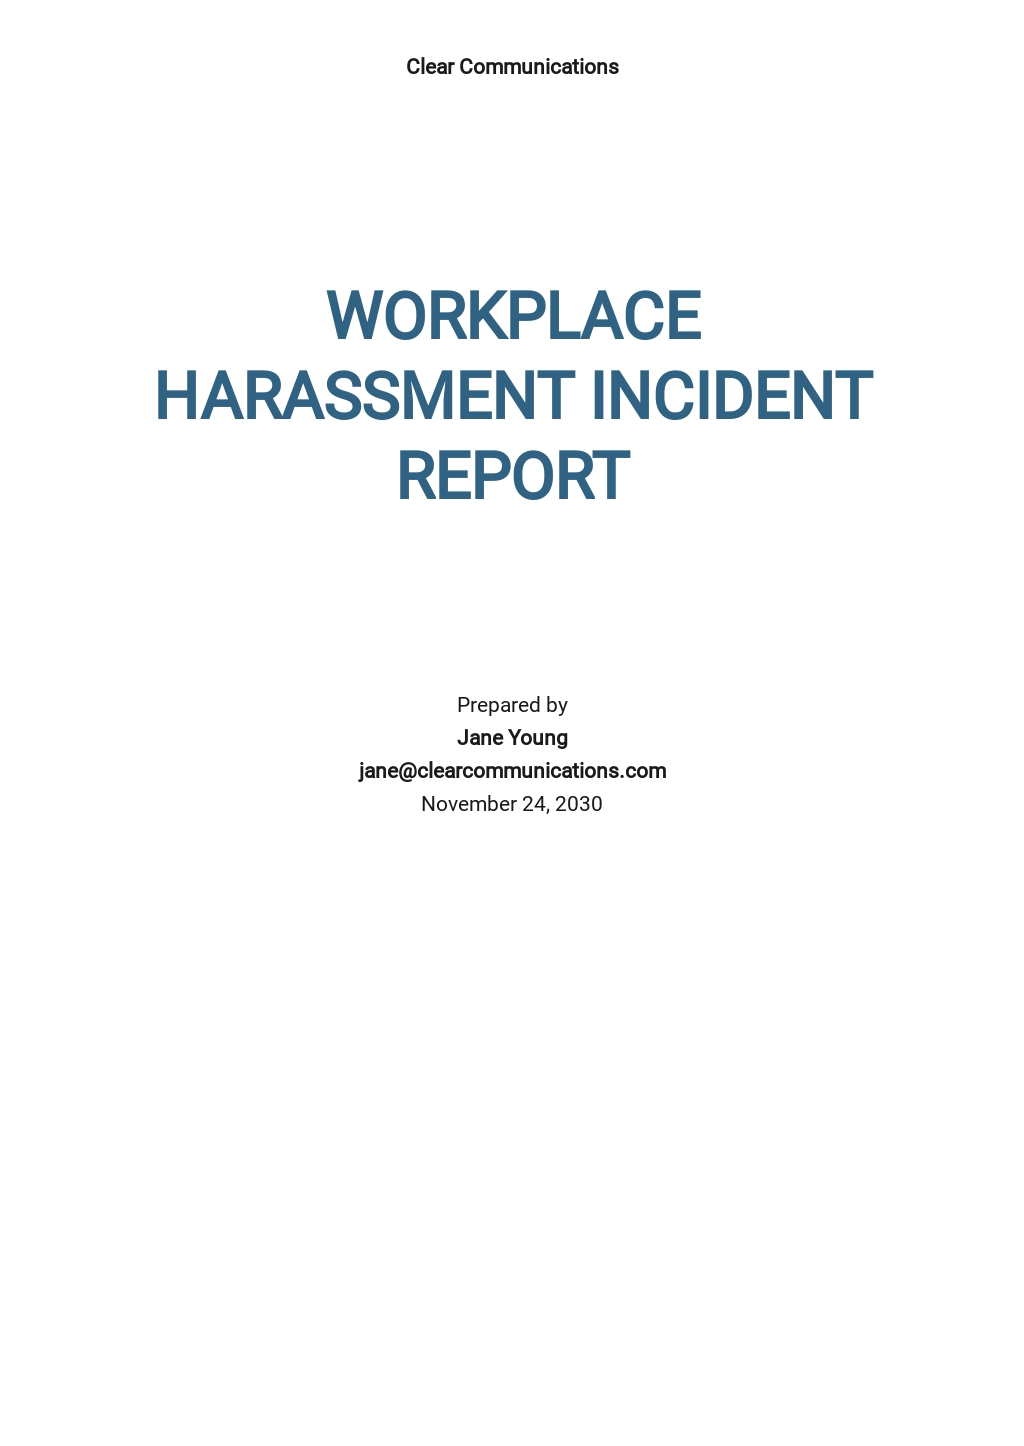 Workplace Harassment Incident Report Form Template.jpe